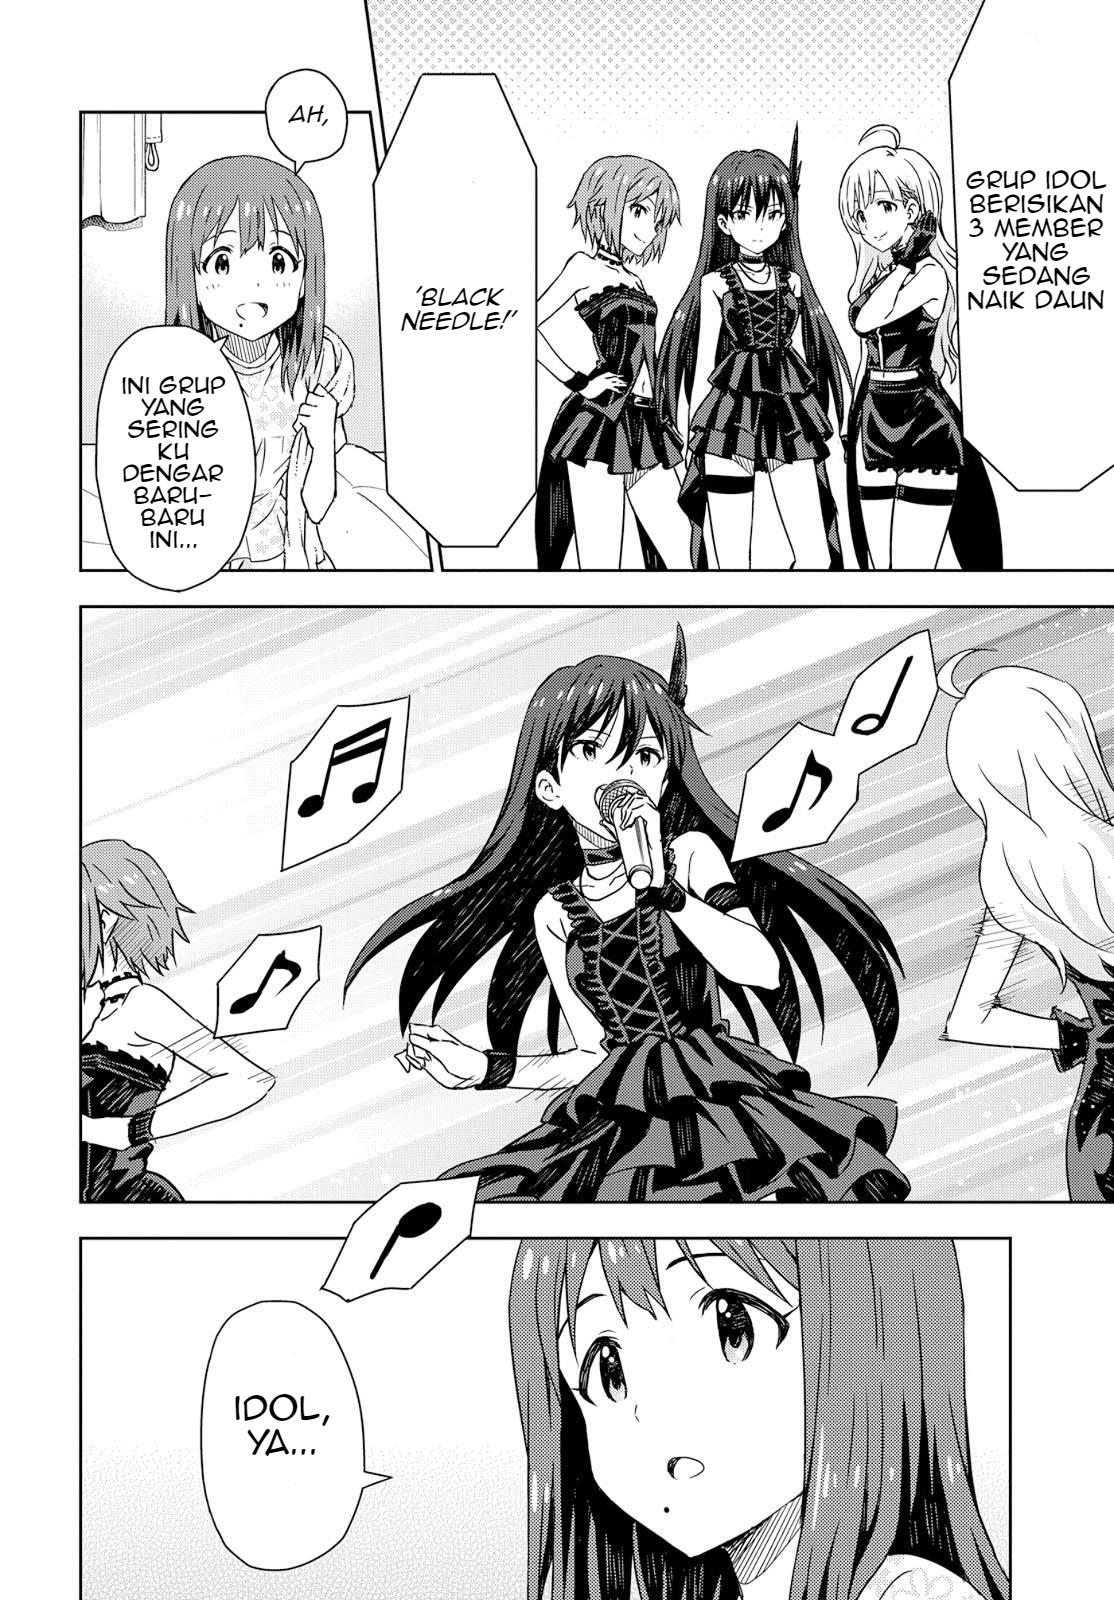 Morning Glow is Golden: The IDOLM@STER Chapter 6.2